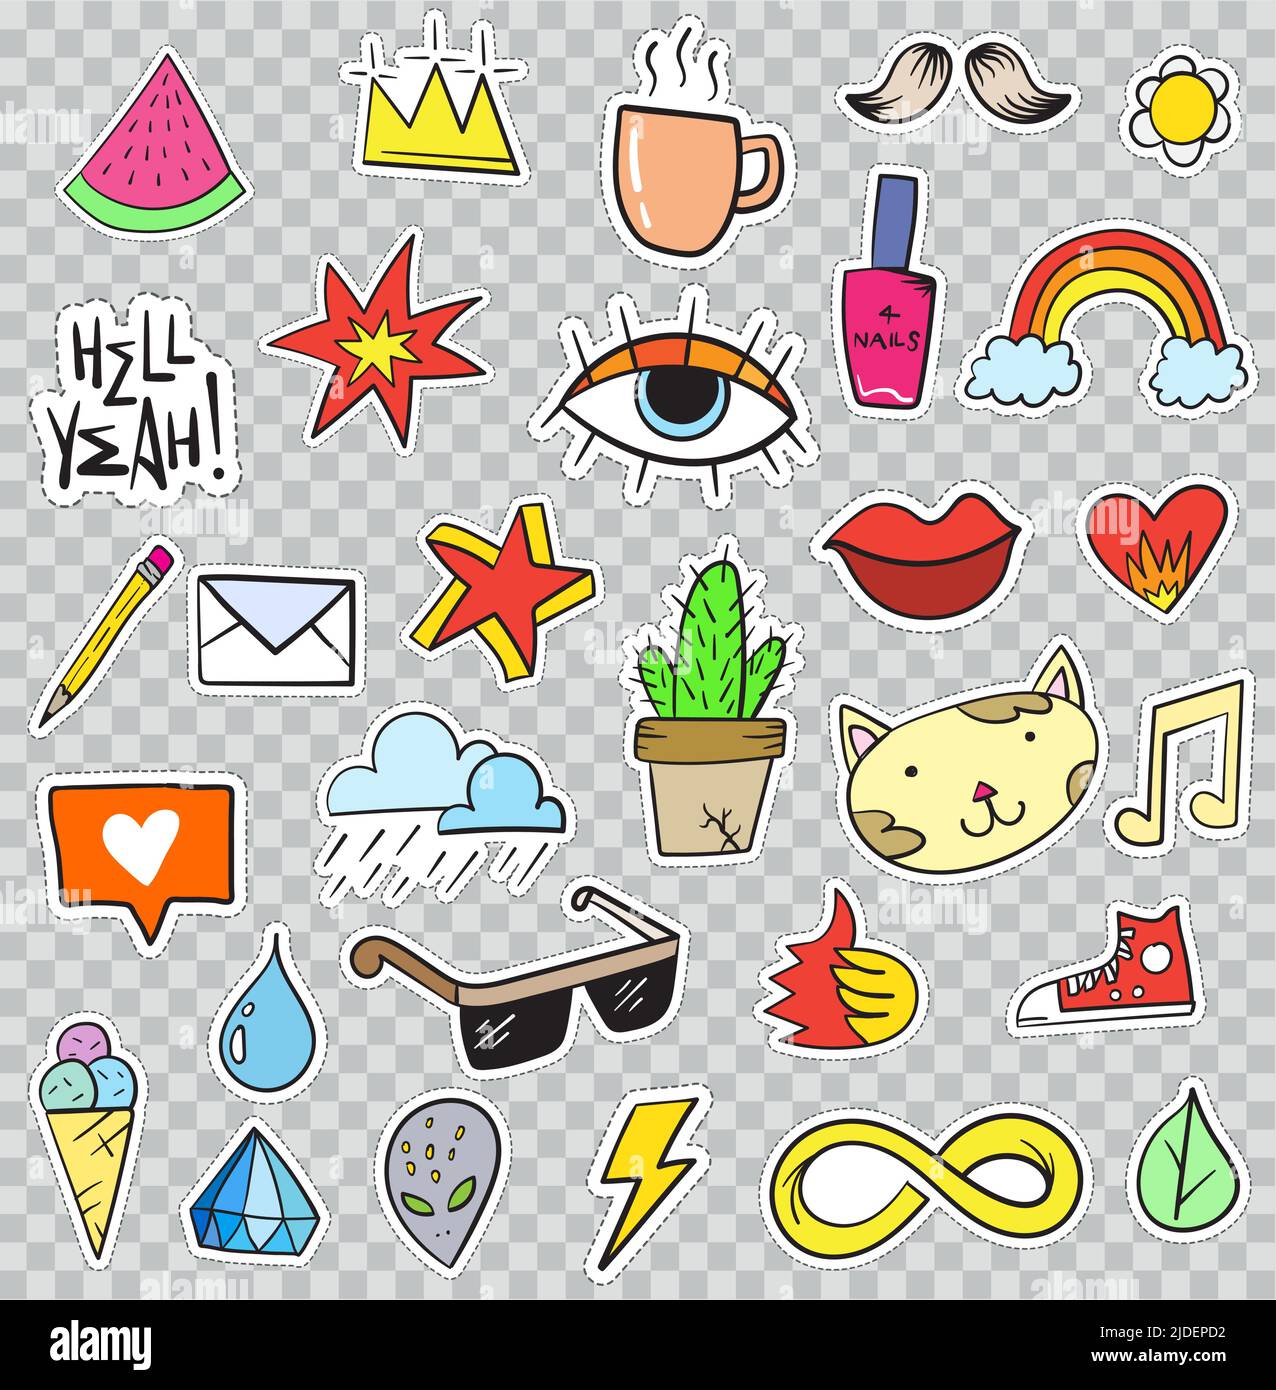 Set of Patches Elements like Flower, Heart, Crown, Cloud, Lips, Mail, Diamond, Eyes. Hand Drawn Vector. Cute Fashionable Stickers Collection. Doodle P Stock Vector